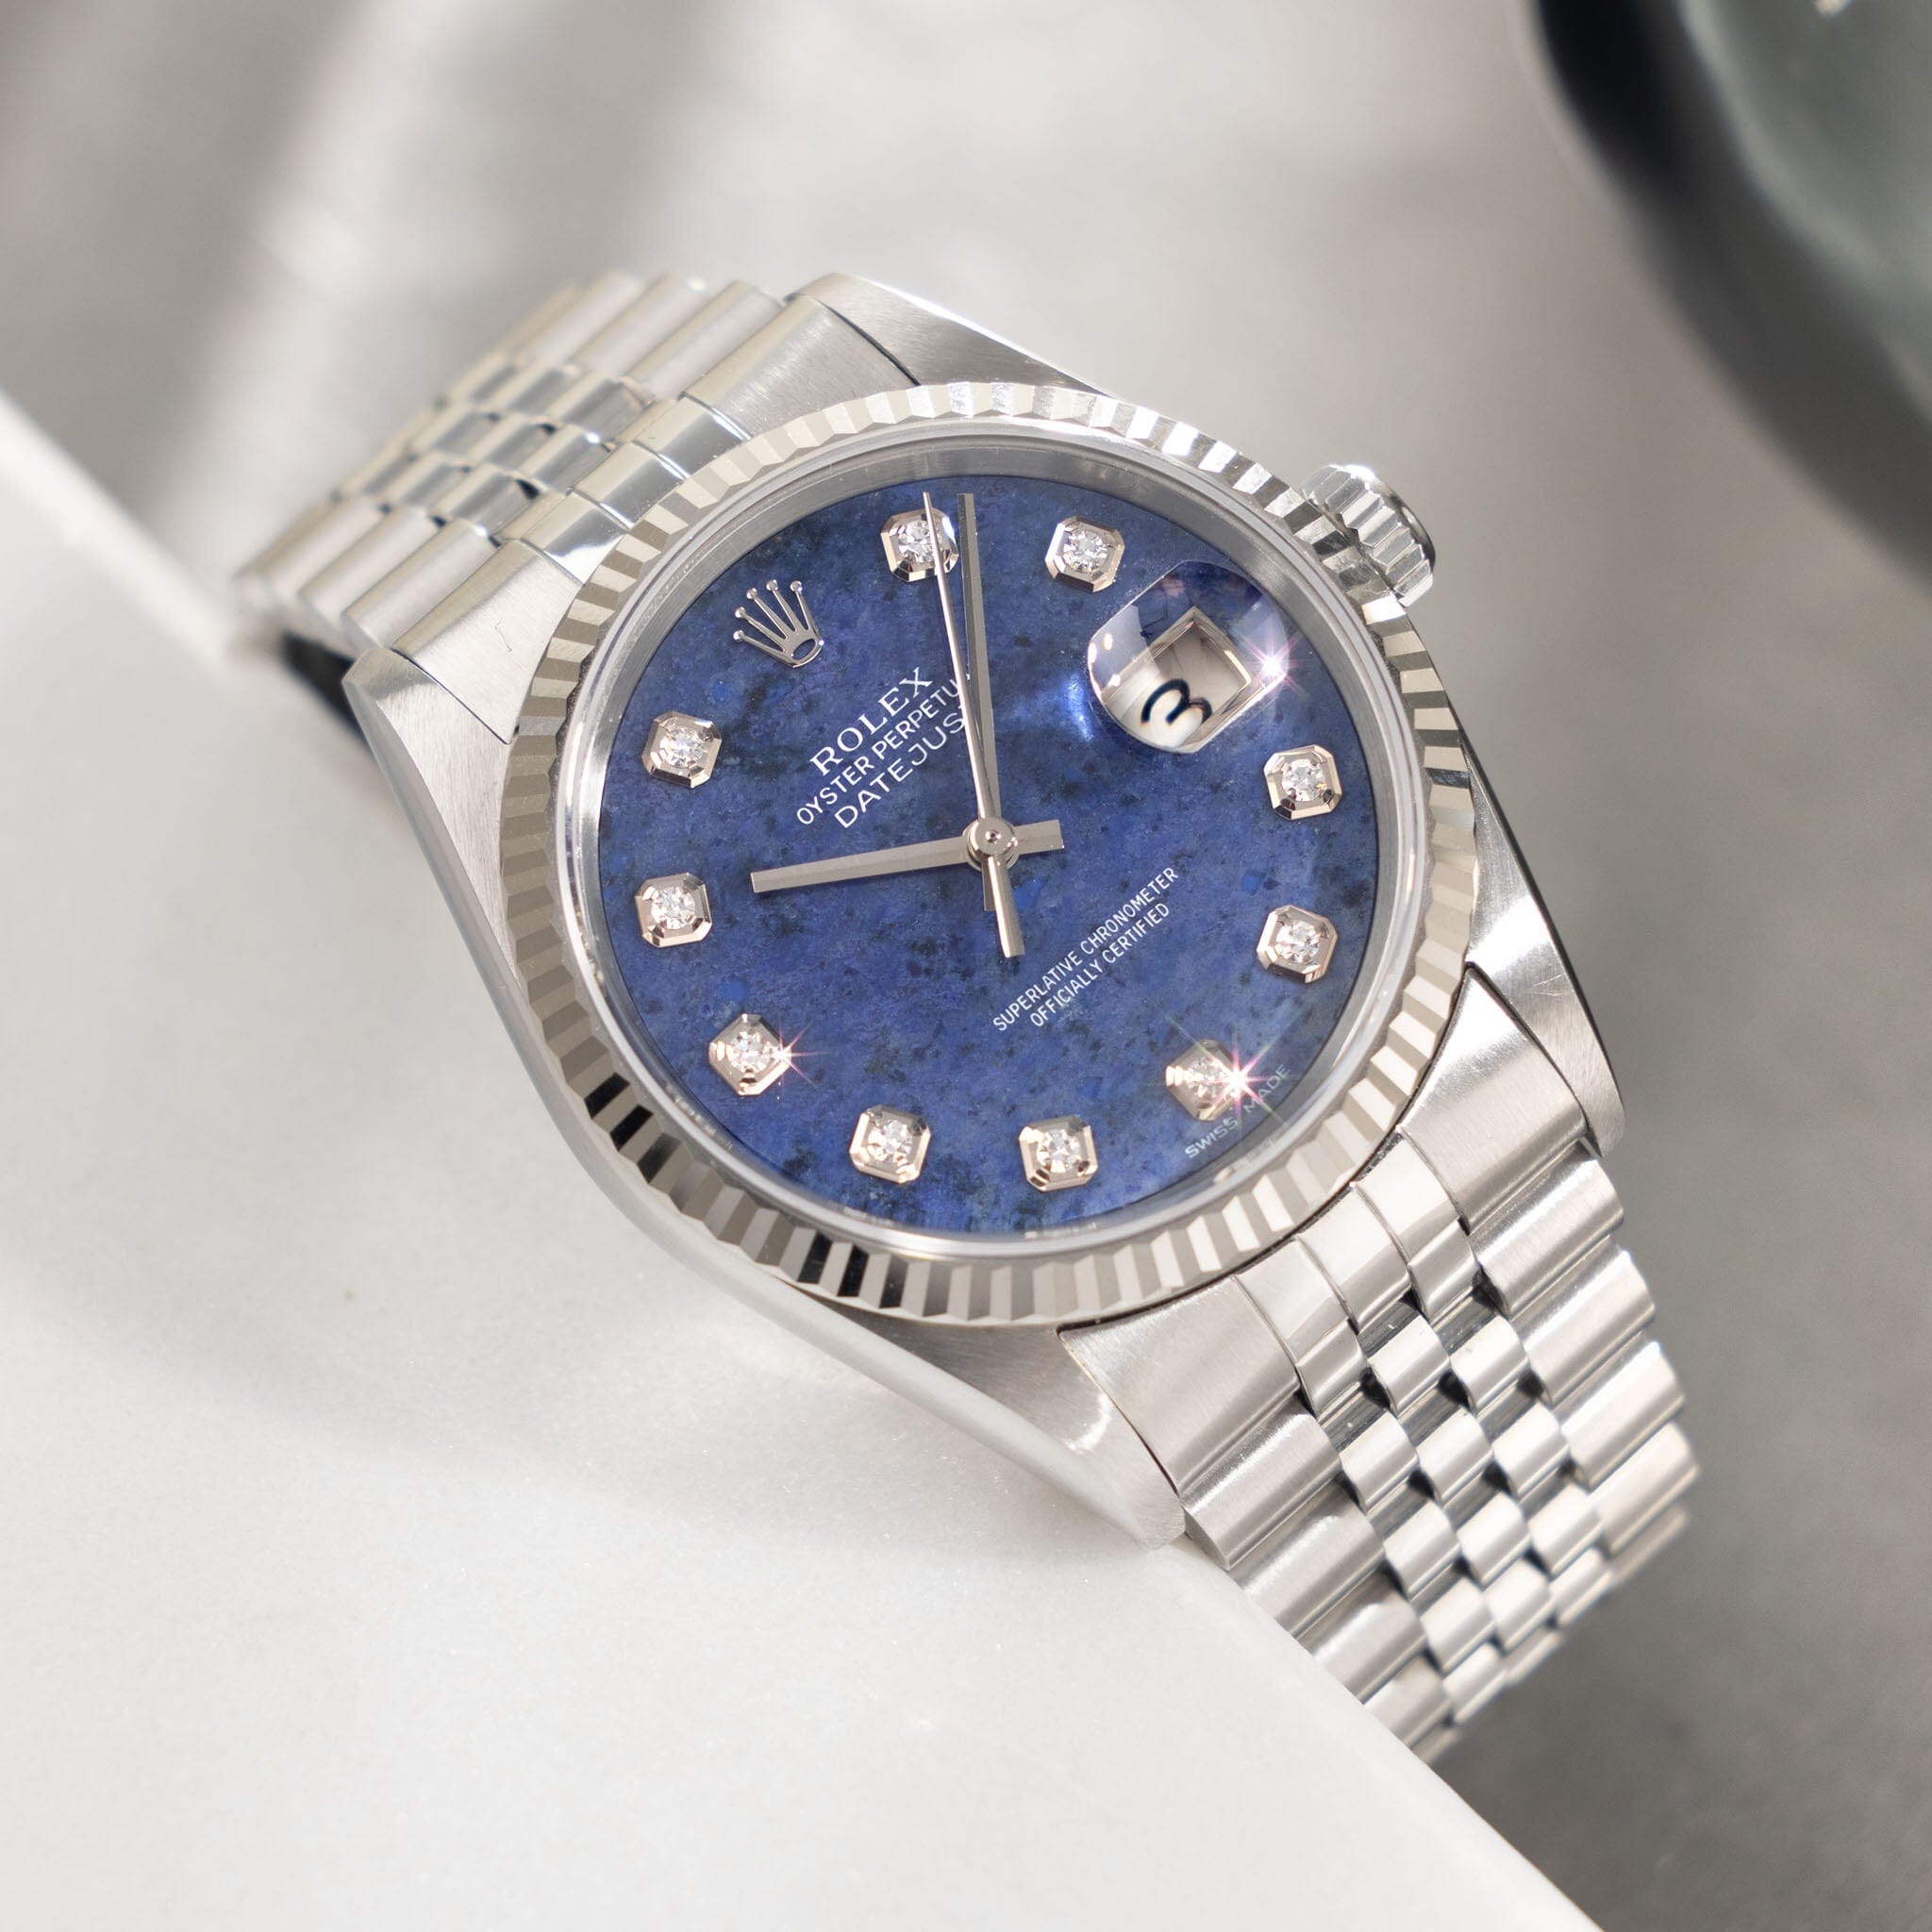 Rolex Datejust Sodalite Dial Ref 16234 Box and Papers set